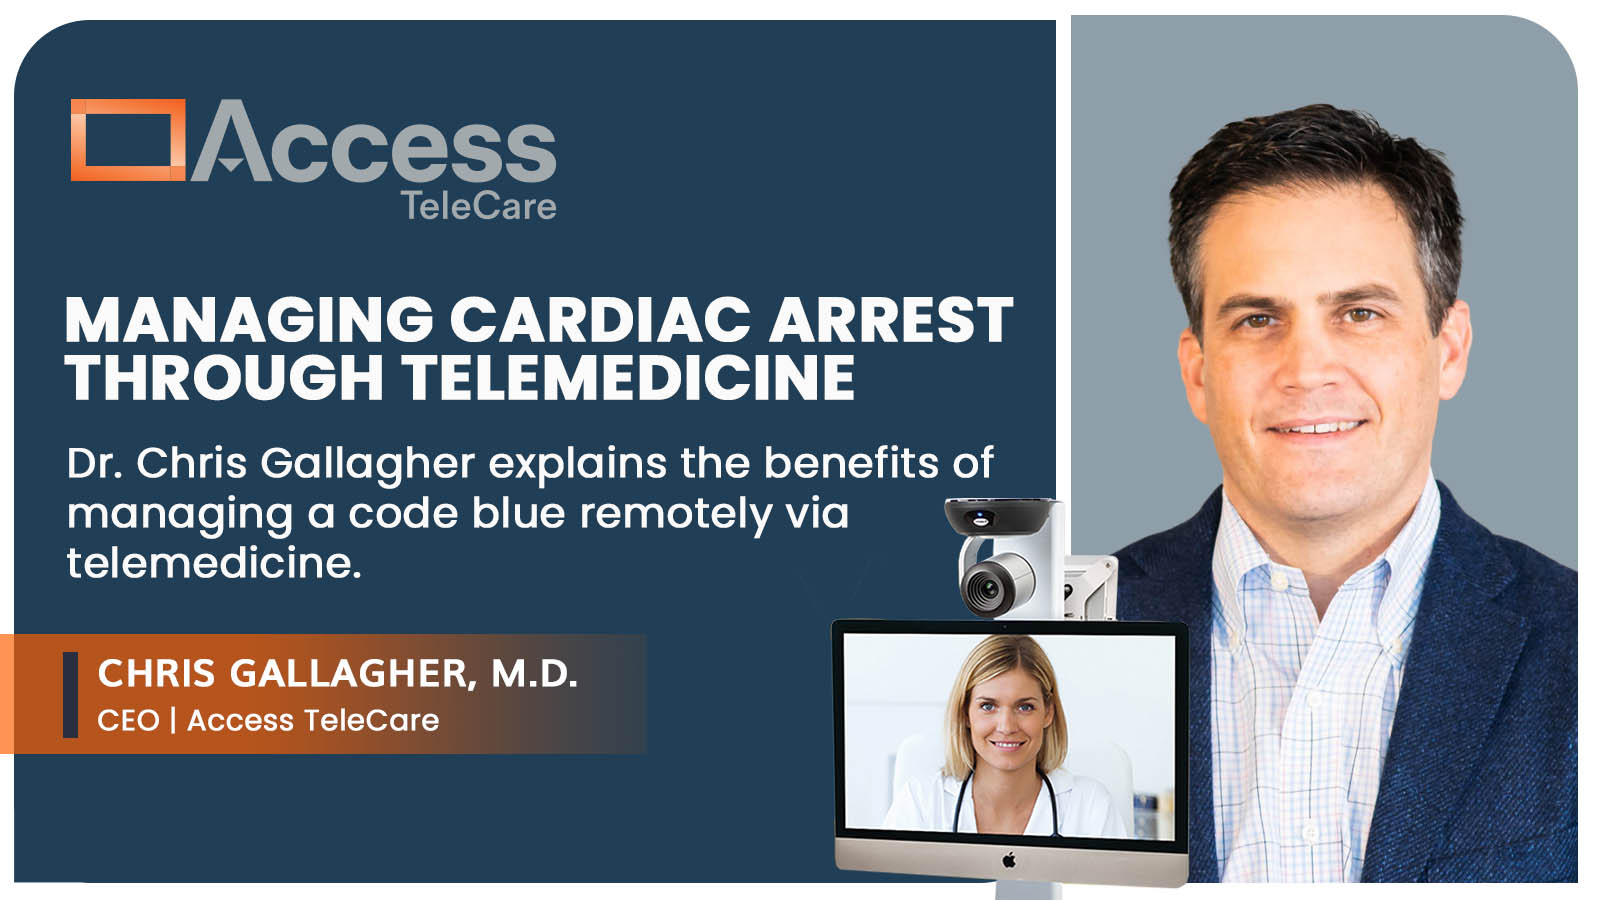 Access TeleCare president/CEO, Dr. Chris Gallagher, explores the benefits of managing a code blue remotely via telemedicine